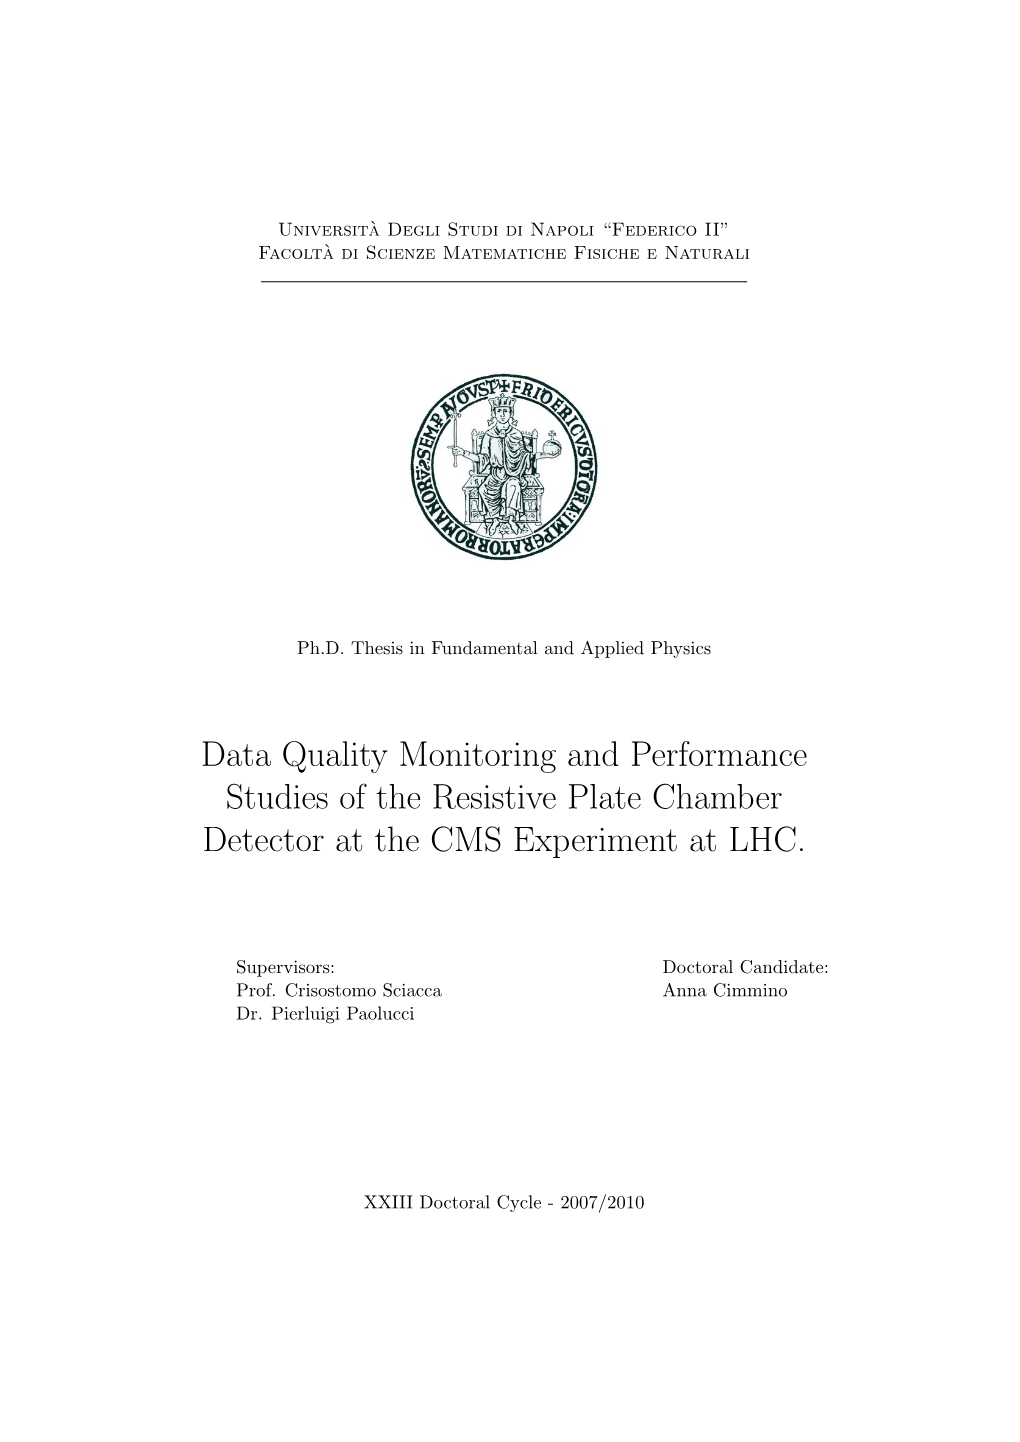 Data Quality Monitoring and Performance Studies of the Resistive Plate Chamber Detector at the CMS Experiment at LHC